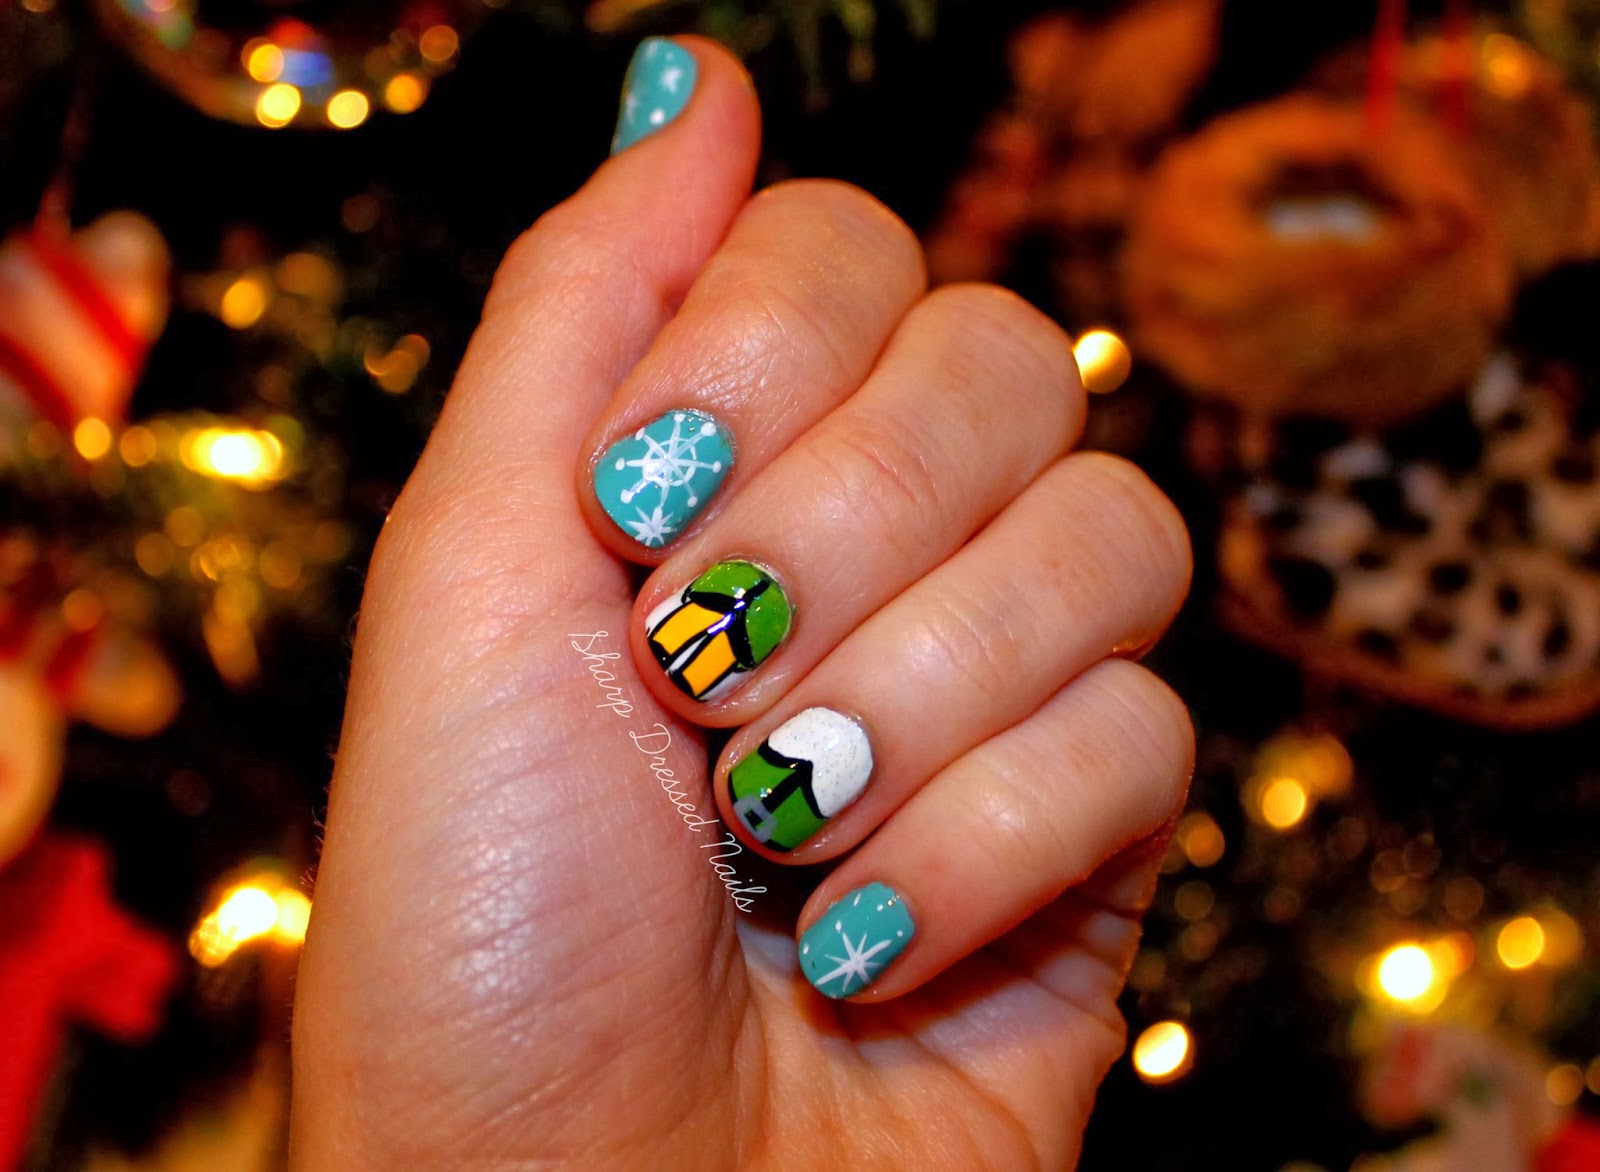 3. "Buddy the Elf" Inspired Holiday Nails - wide 3